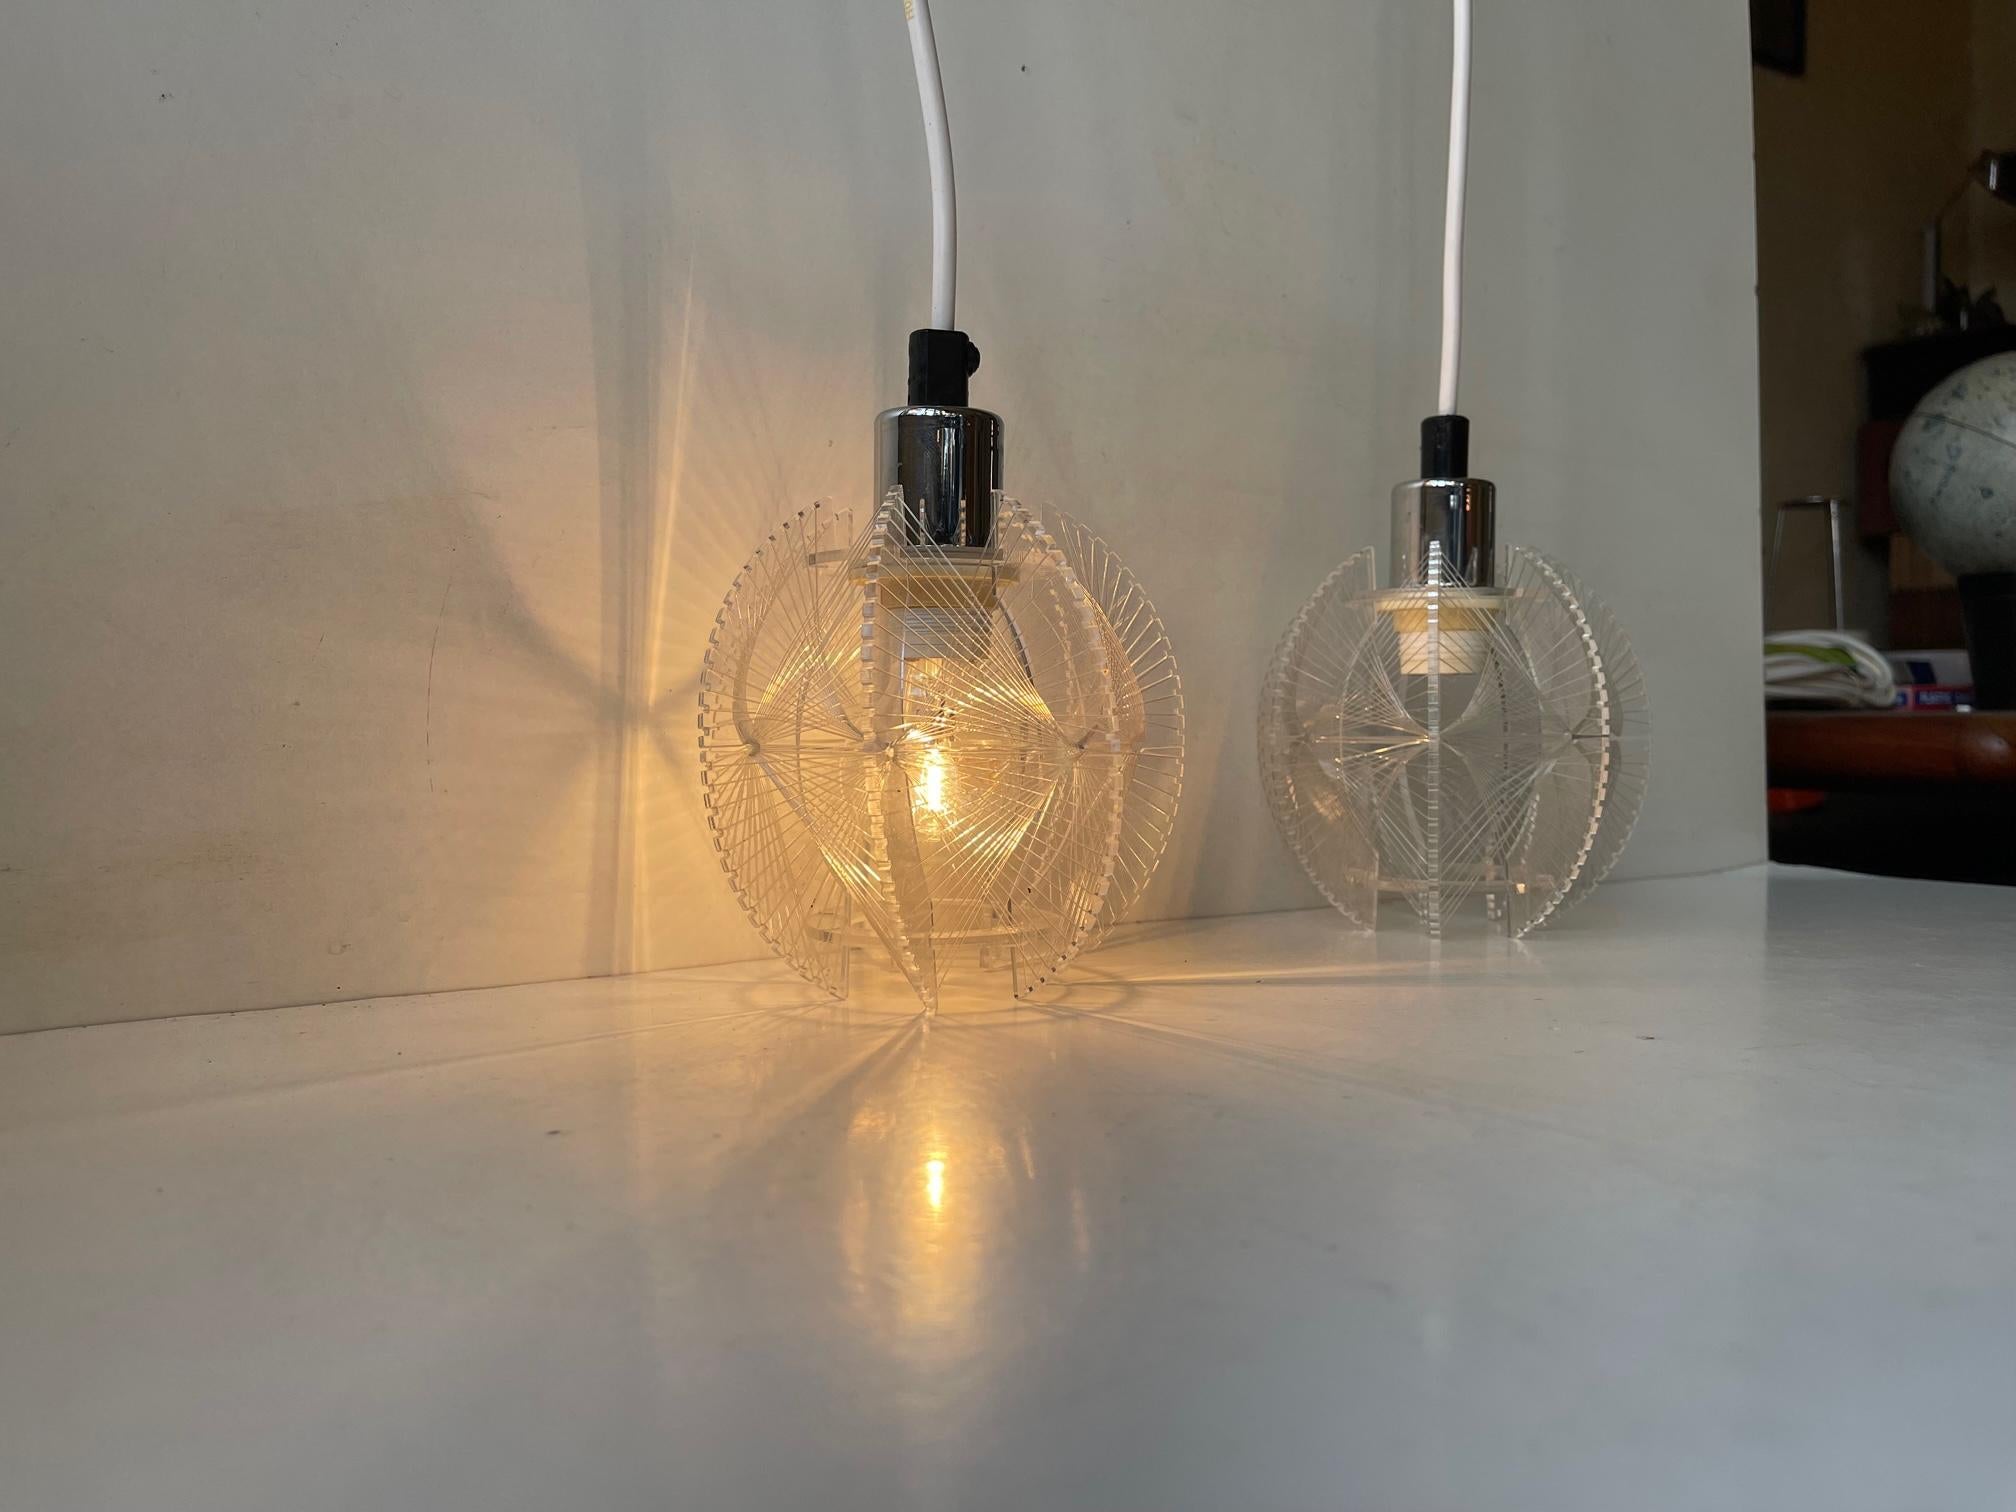 Mid-Century Modern Modernist Lucite & String Ceiling Lamps by Paul Secon for Sompex, Germany, 1970s For Sale